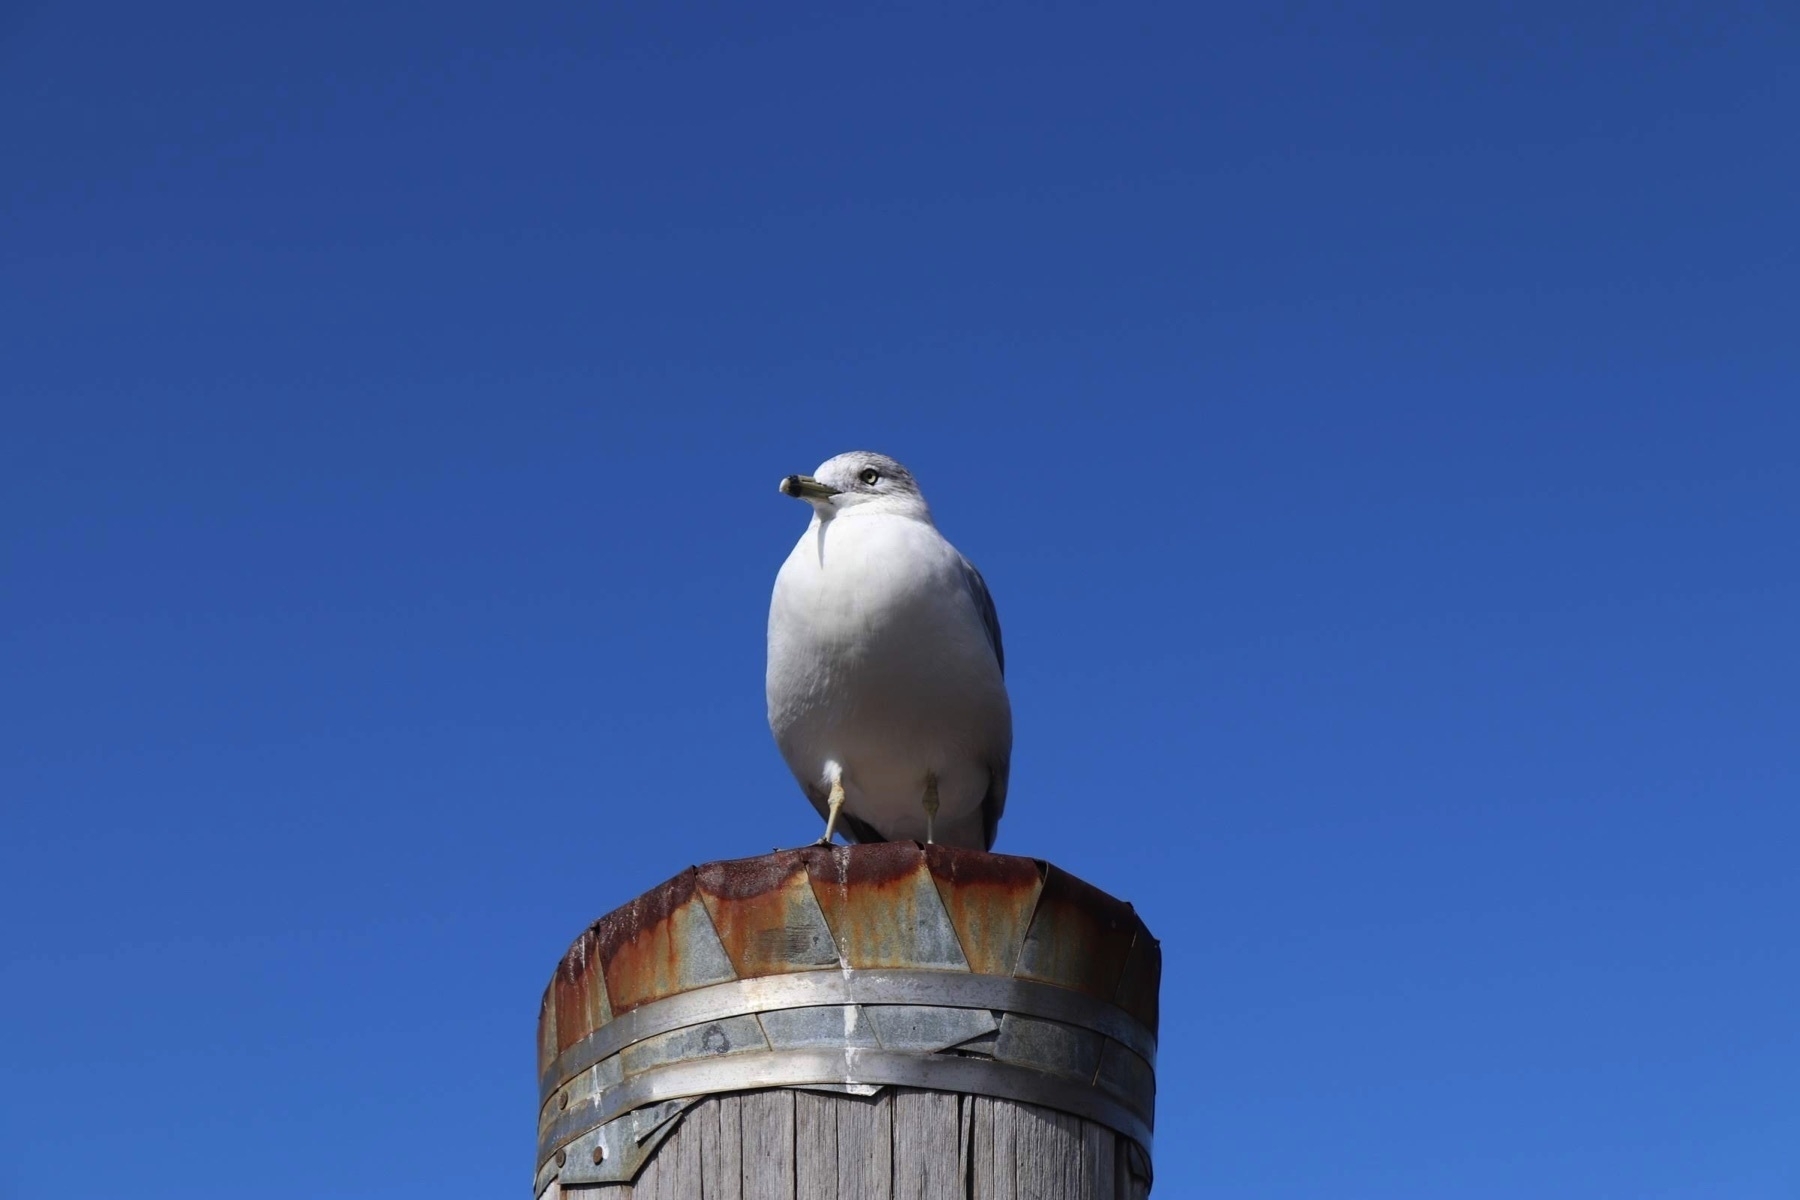 This seagull or Чайка is just sitting on top of a pillar. Pic taken October 2019